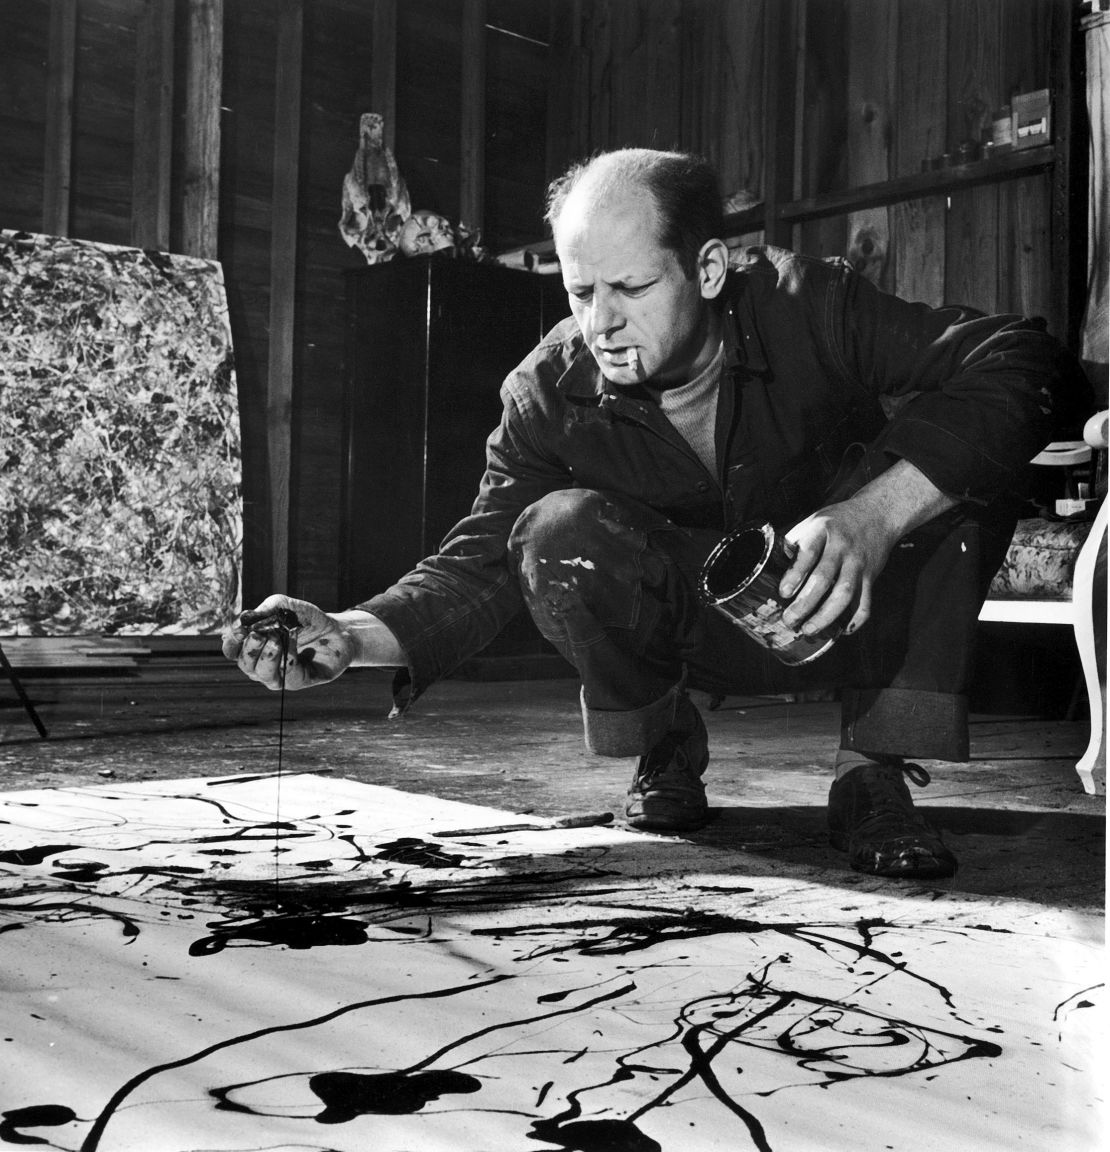 Jackson Pollock, cigarette in mouth, drops paint onto canvas.